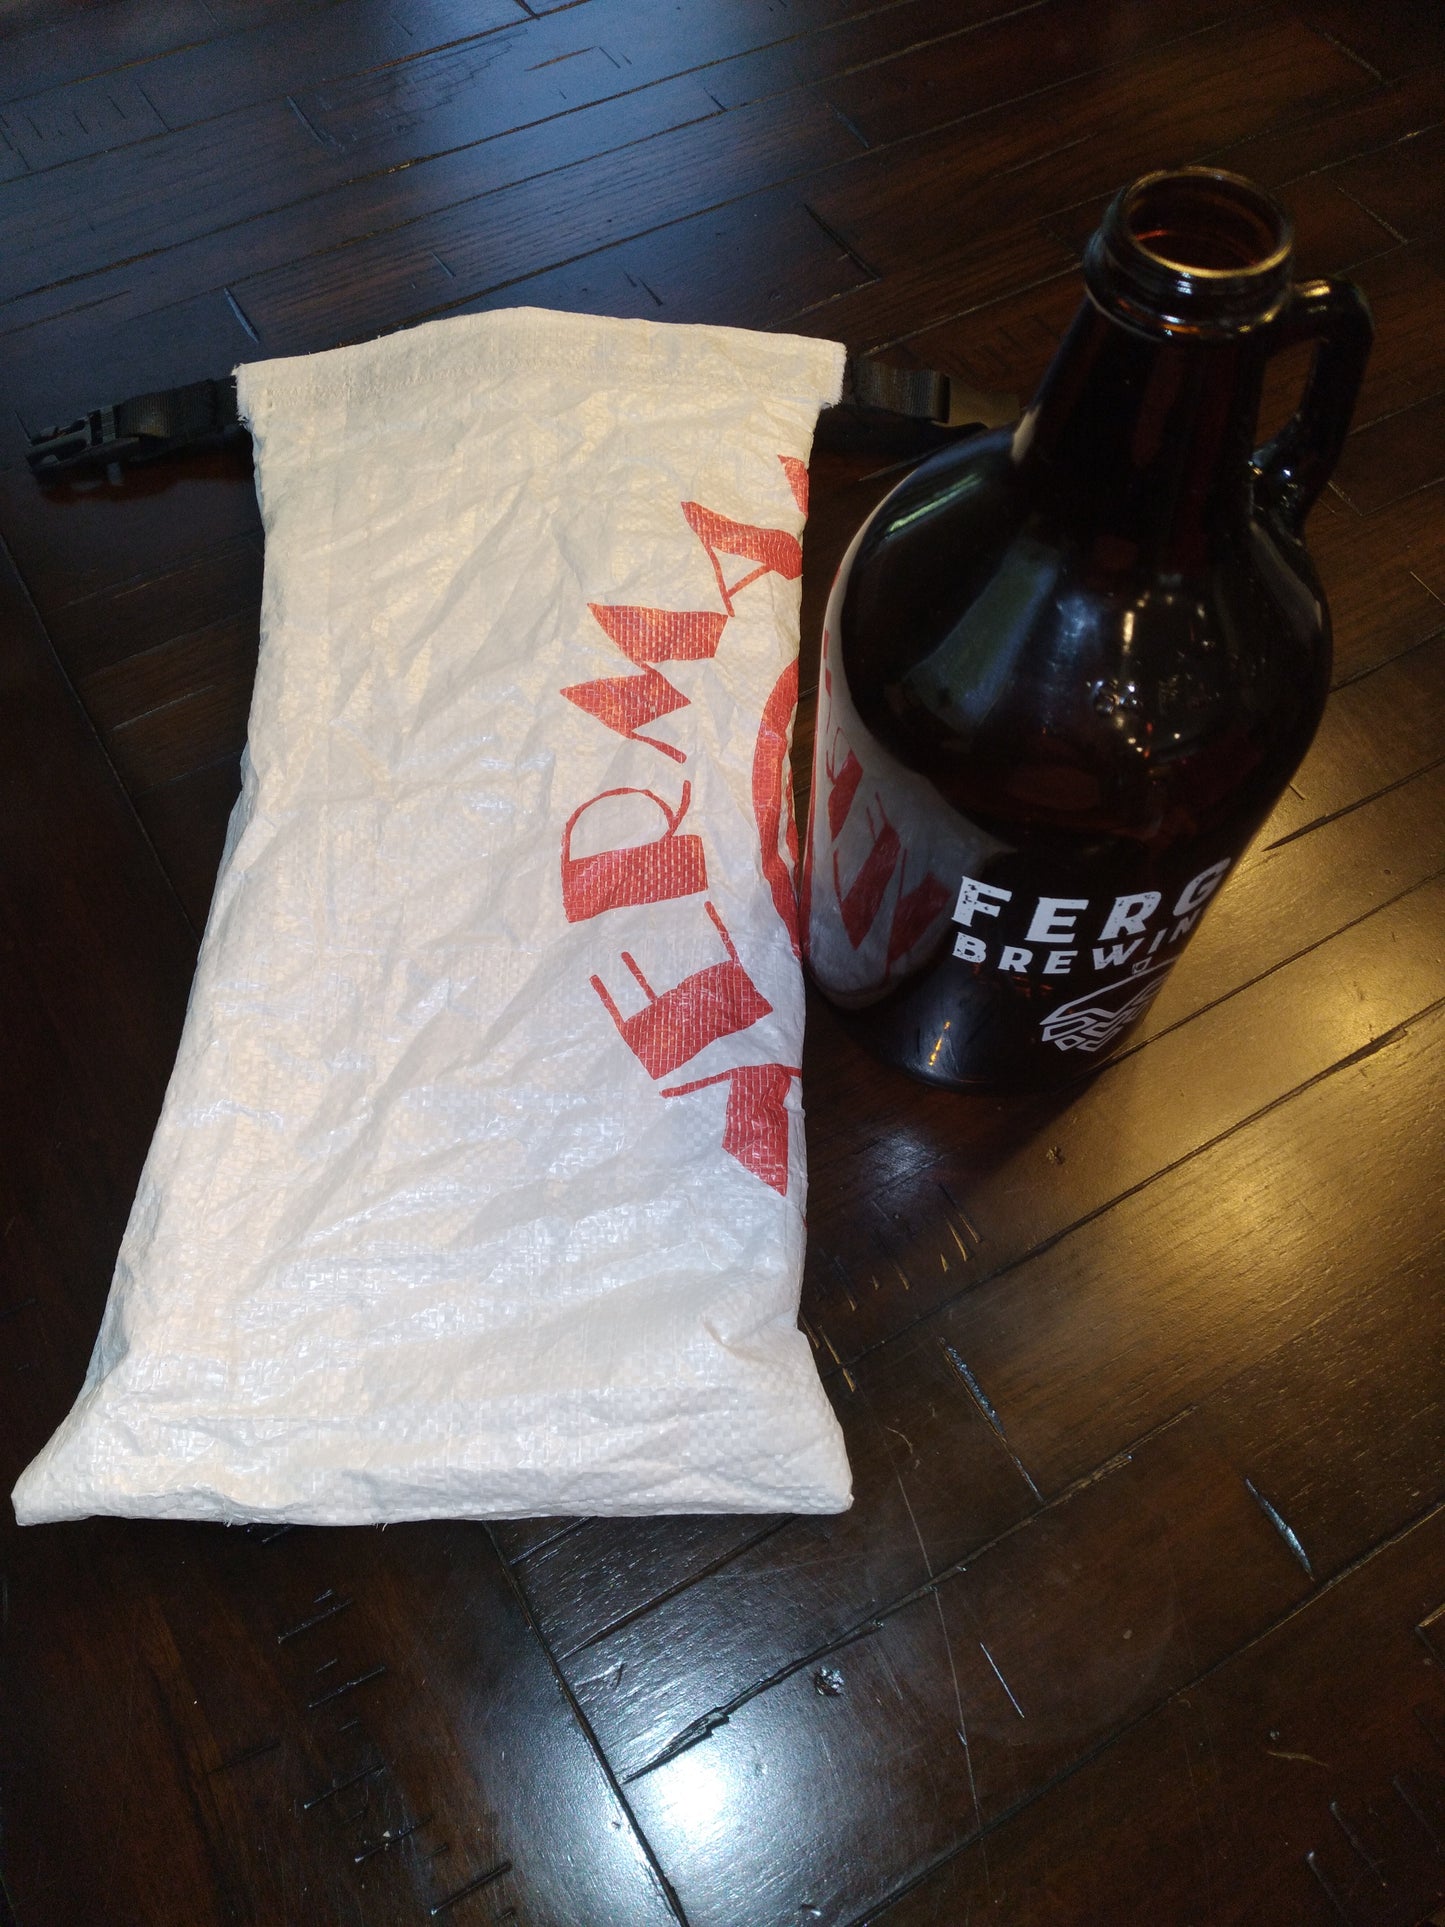 Bagging yourself a beer? - China Plus